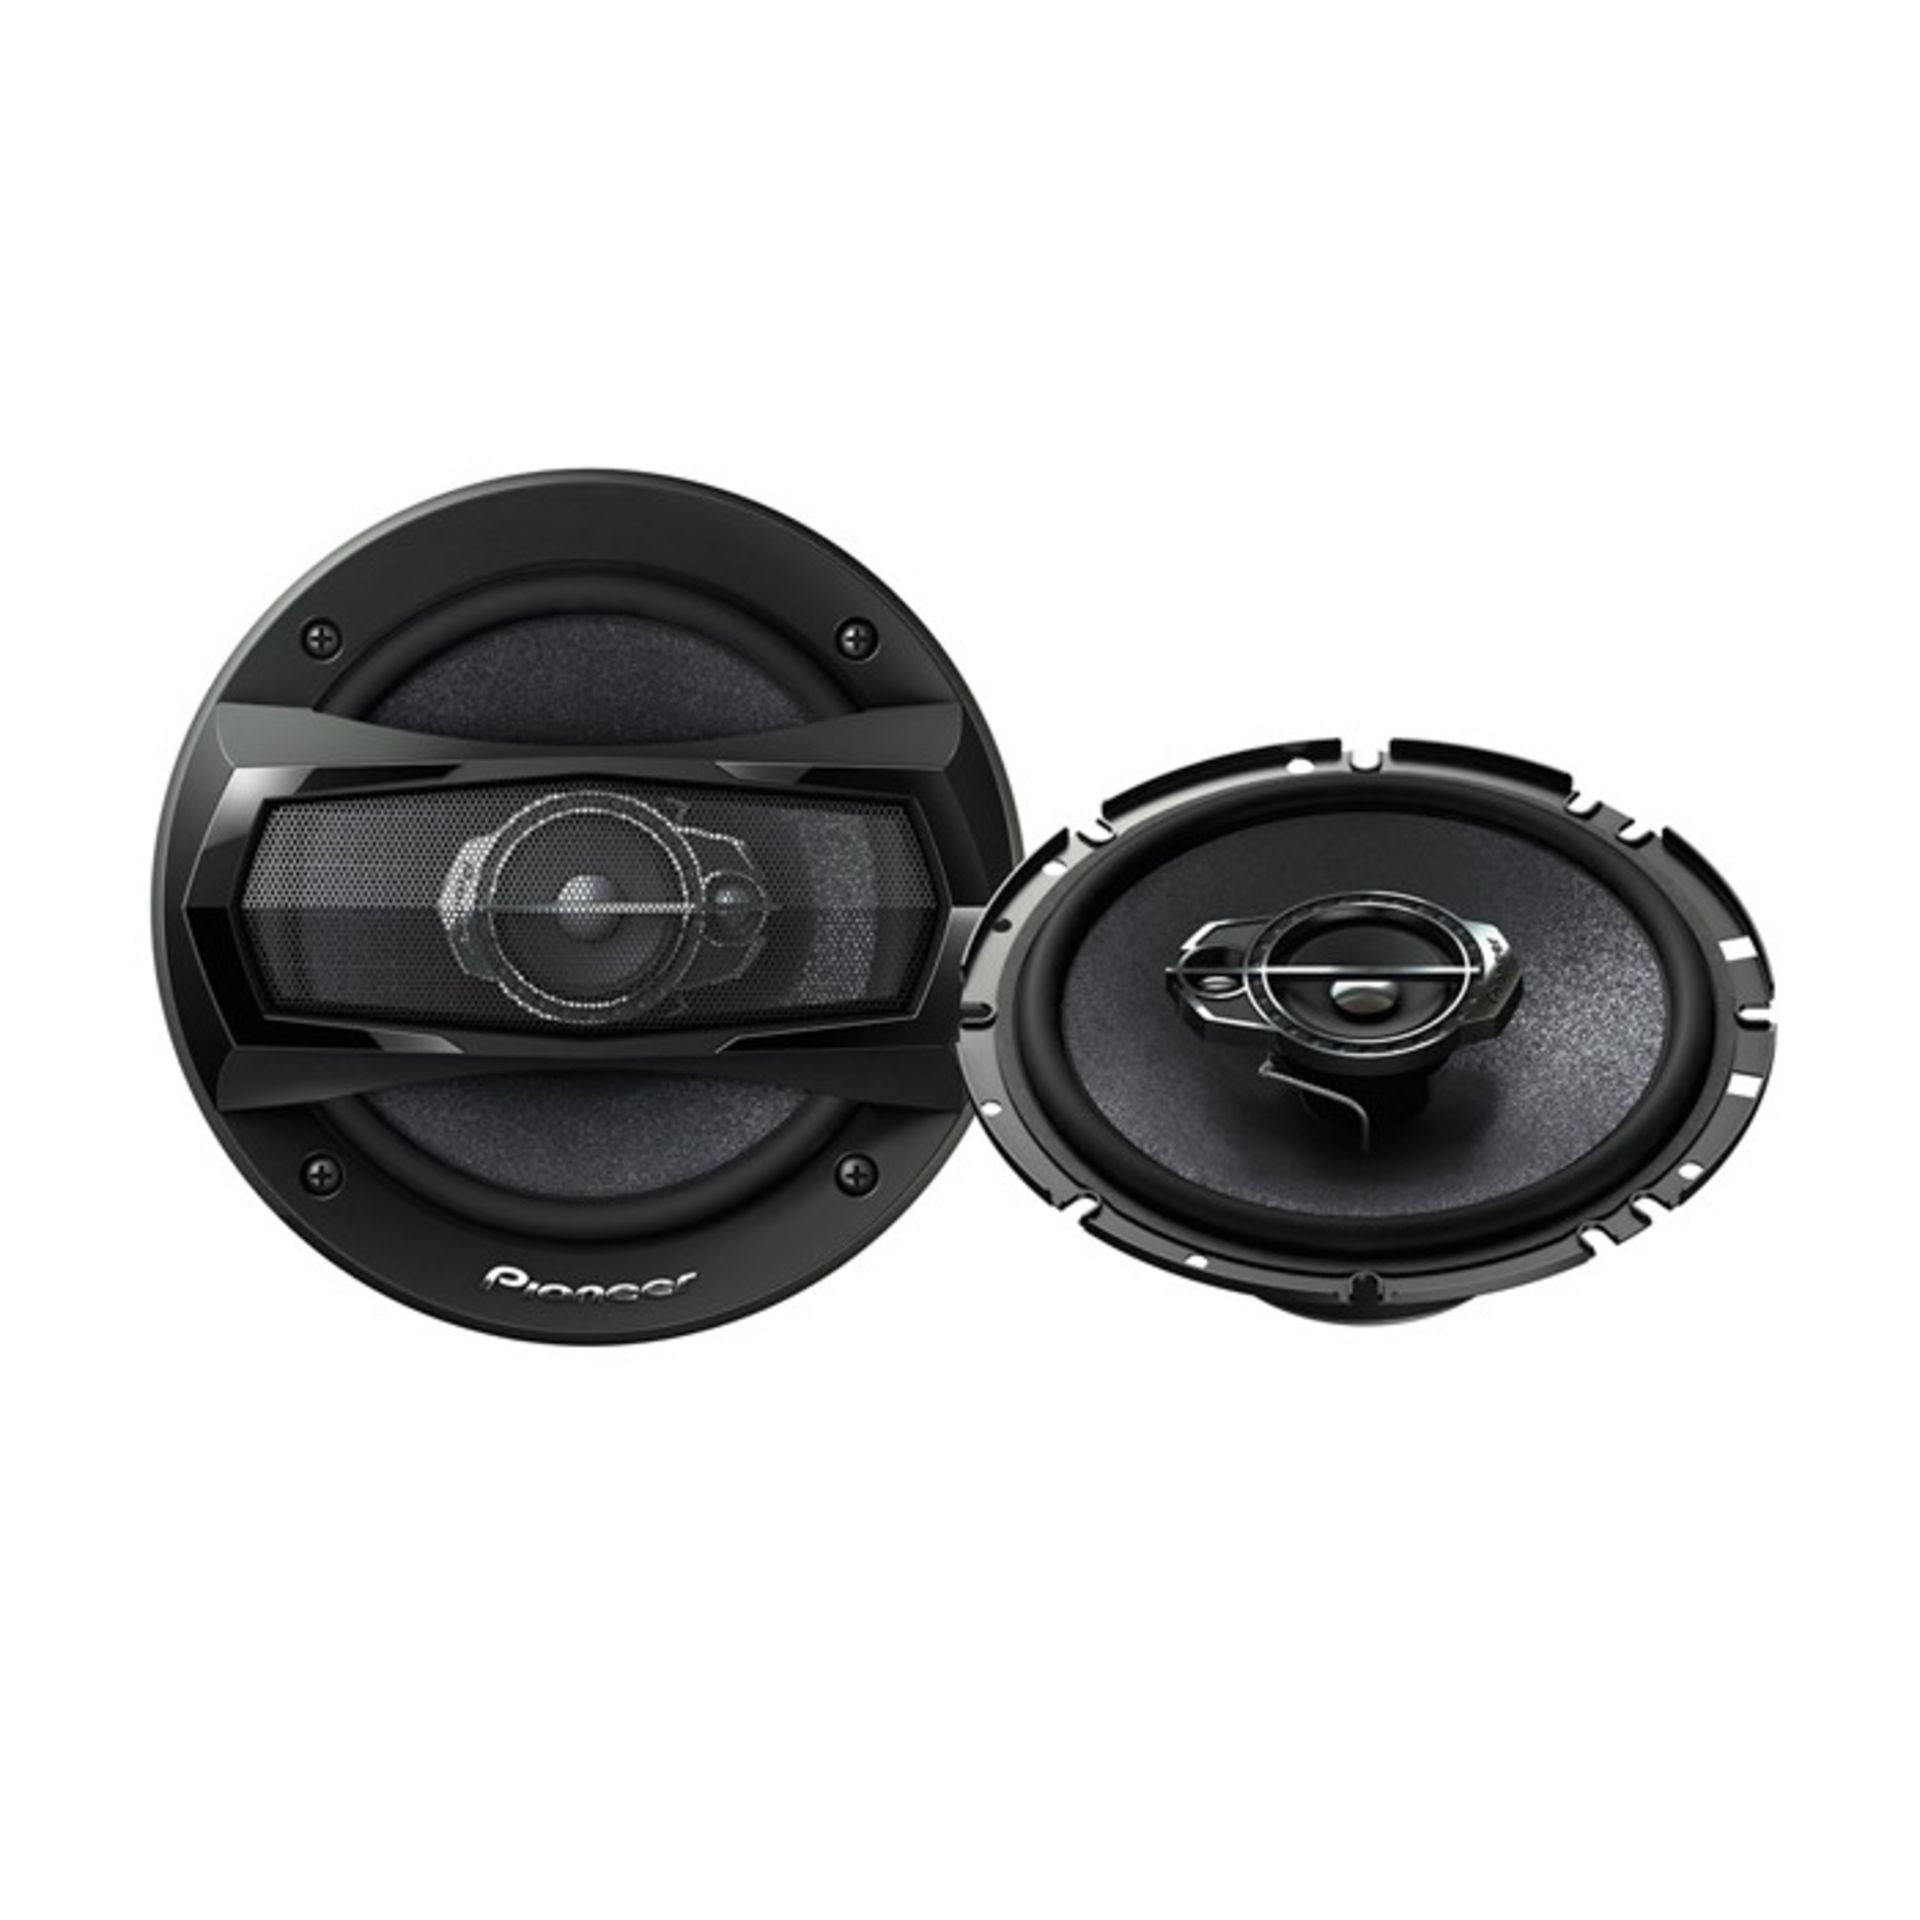 PIONEER 17CM 300W MAX 3 WAY CAR SPEAKER RRP £44.99Condition ReportAppraisal Available on Request-